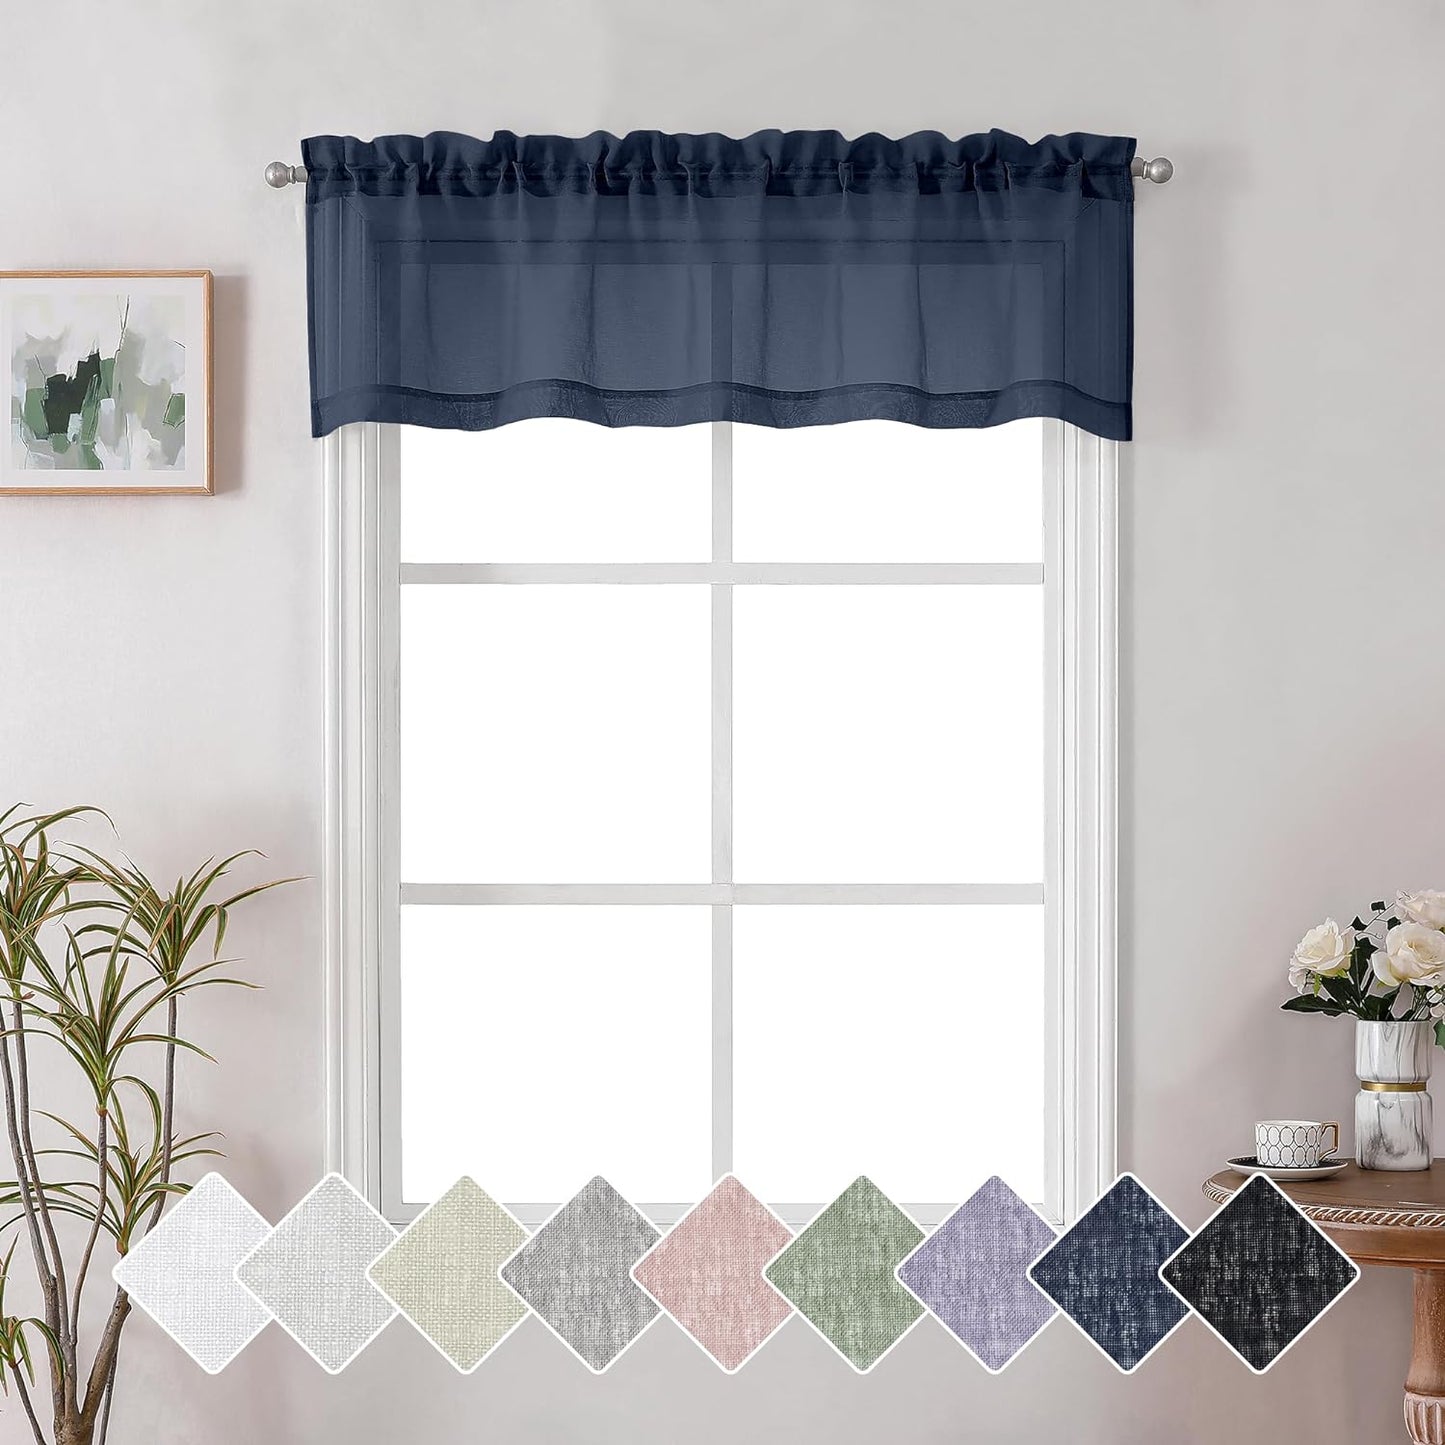 Lecloud Doris Faux Linen Sheer Grey Valance Curtains 14 Inches Length, Cafe Kitchen Bedroom Living Room Gauzy Silver Grey Curtain for Small Window, Slub Light Gray Valance Dual Rod Pockets 60X14 Inch  Lecloud Navy Blue 60 W X 14 L 